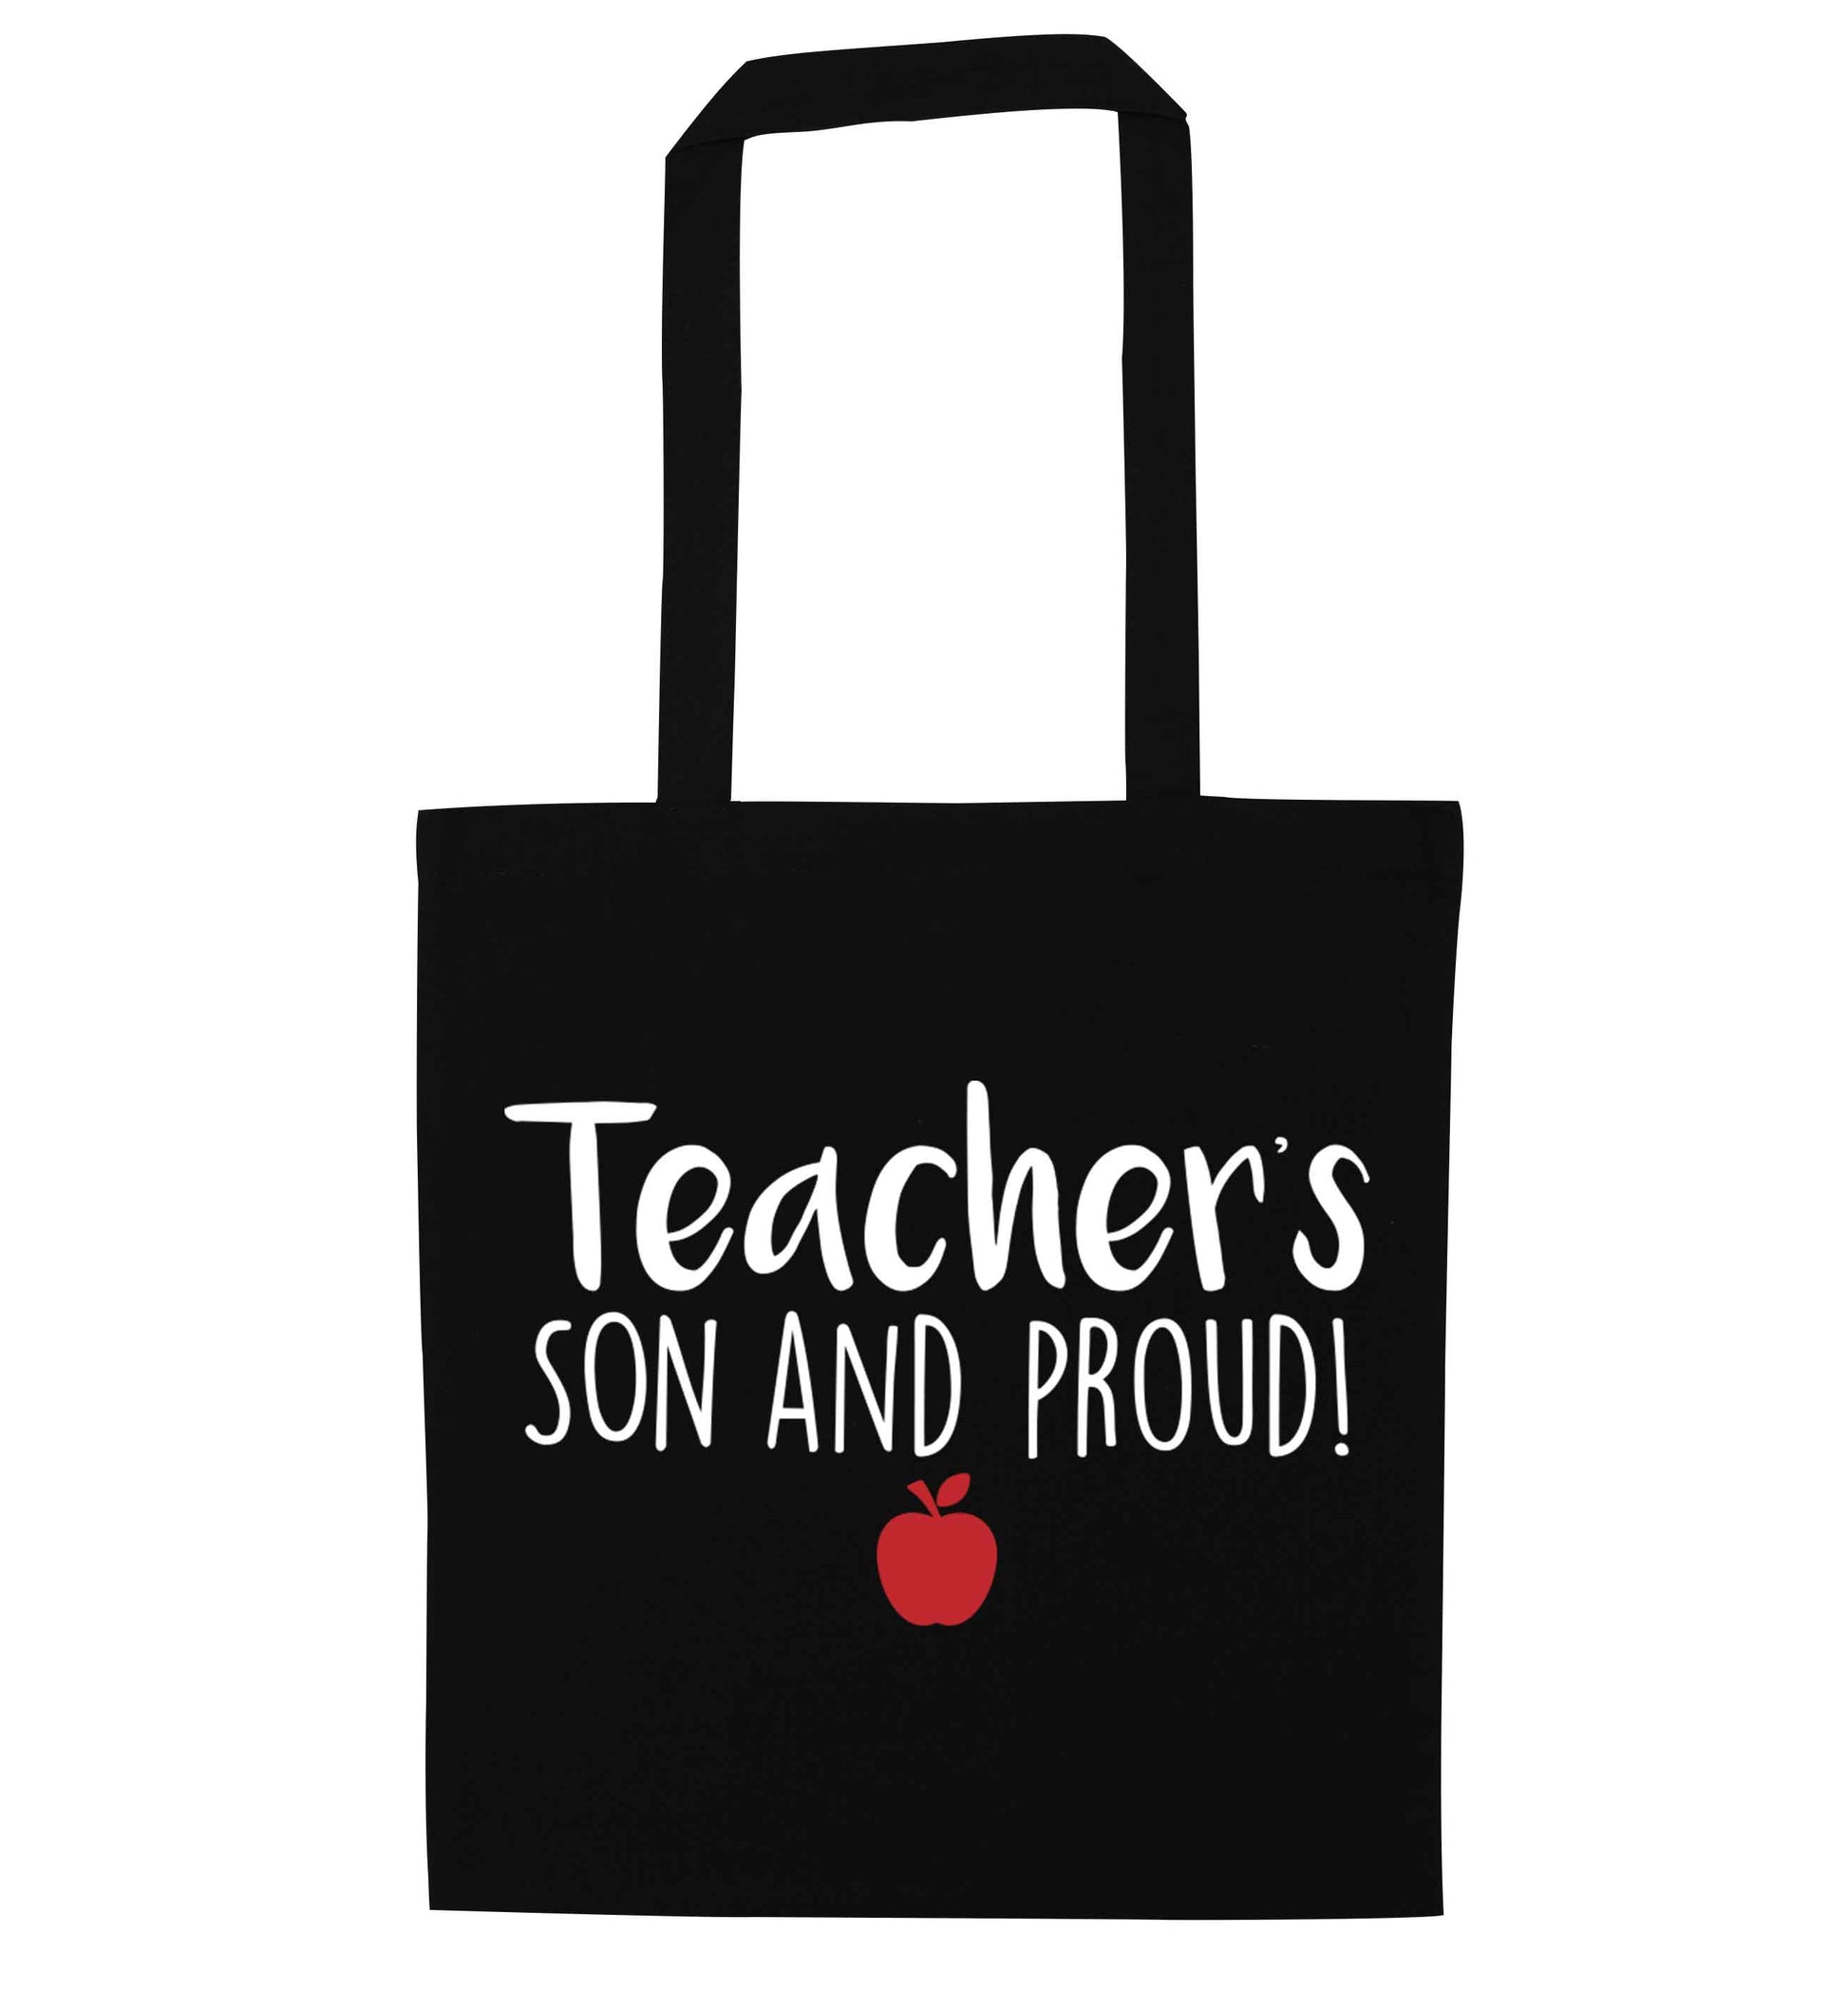 Teachers son and proud black tote bag